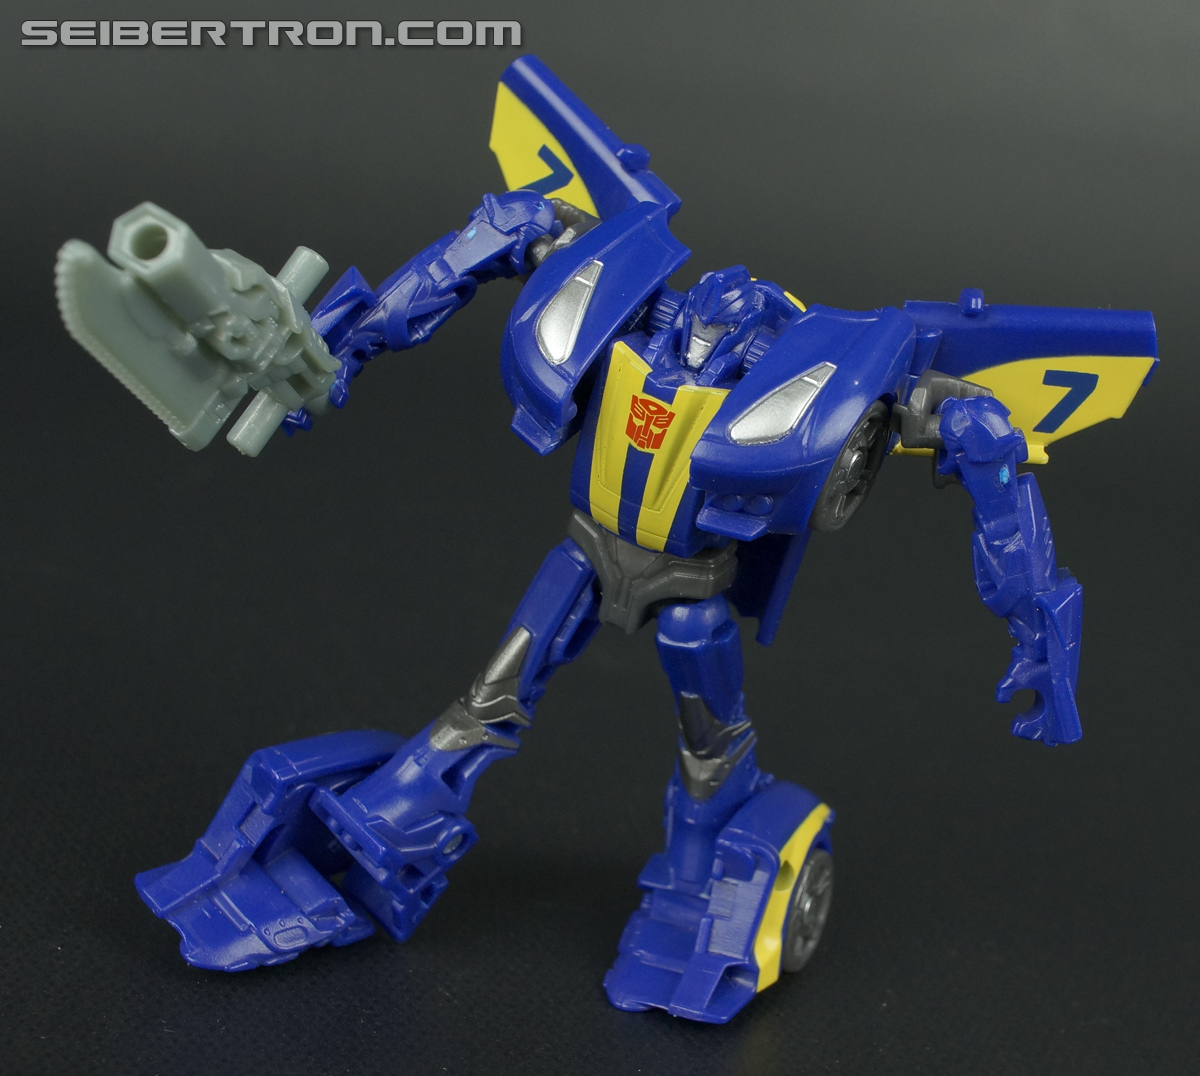 Transformers Prime Beast Hunters Cyberverse Smokescreen (Sky Claw) (Image #84 of 107)